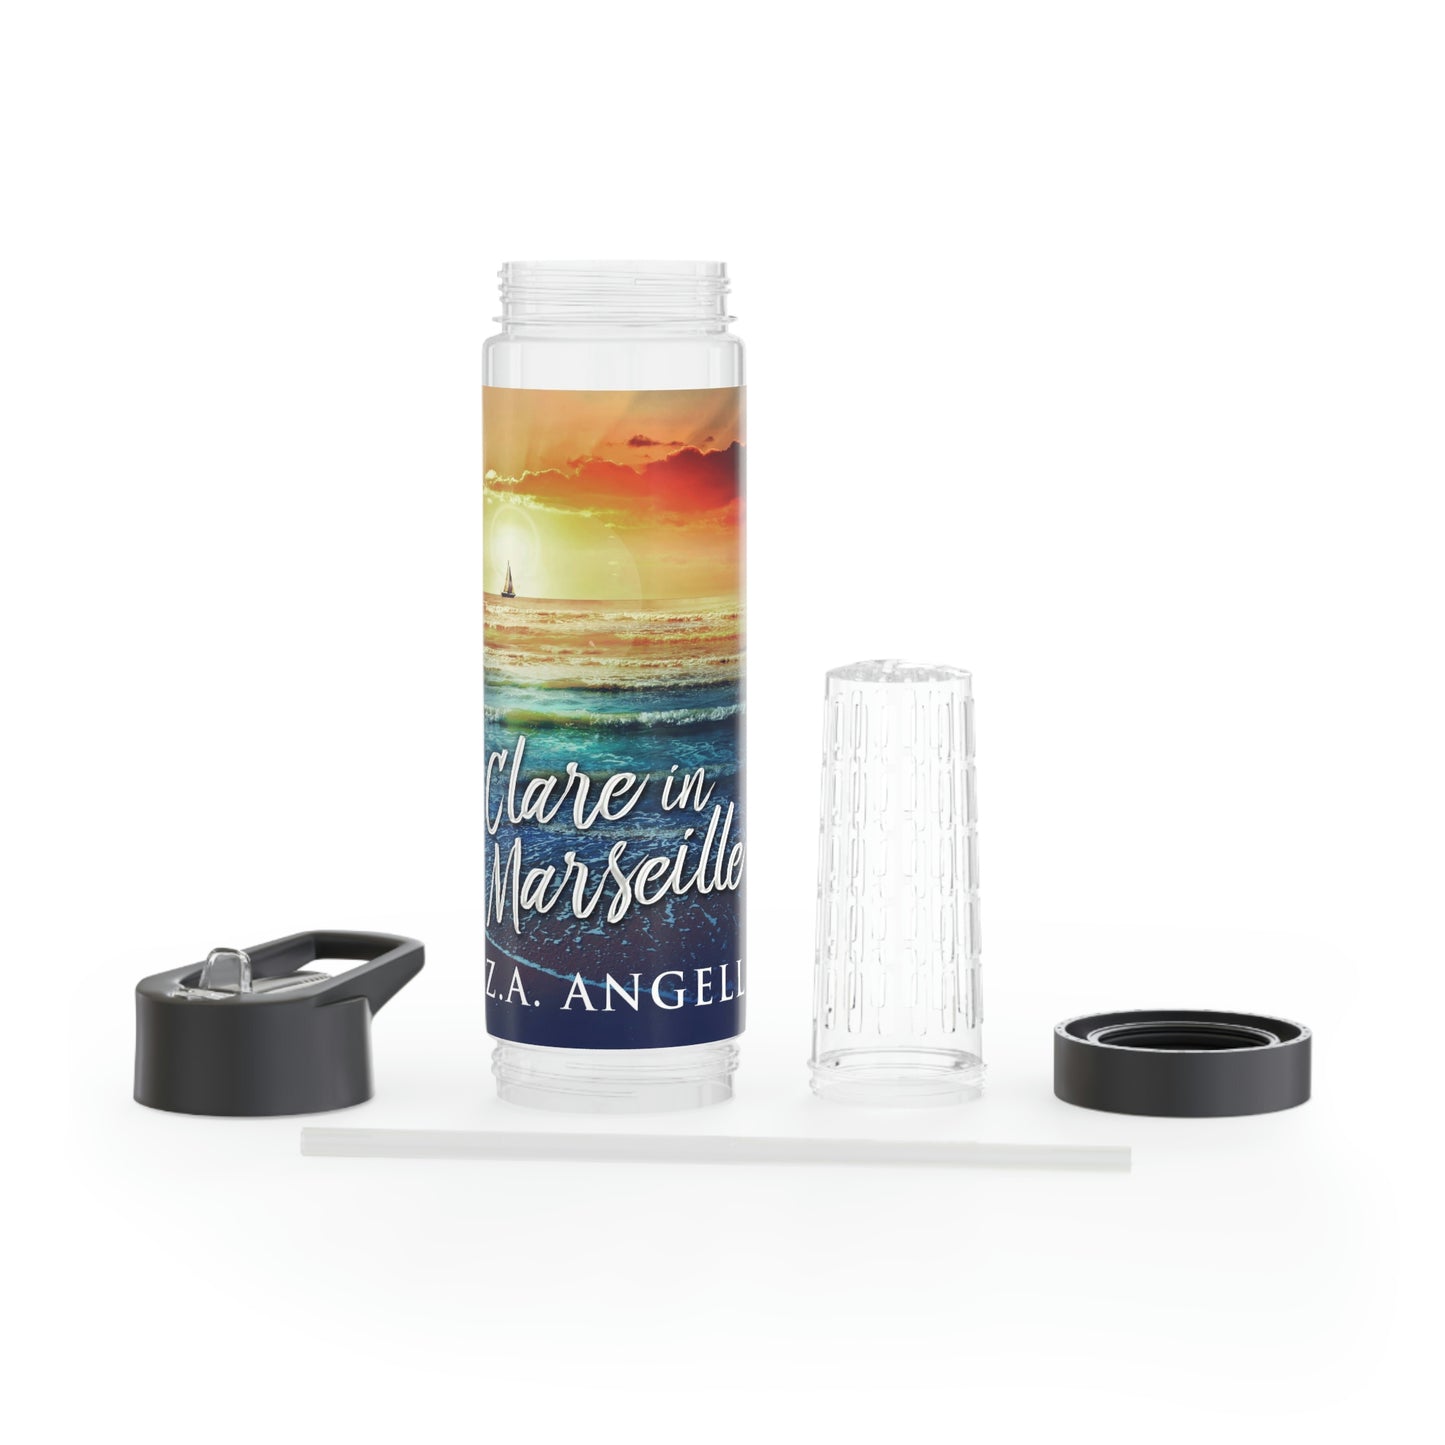 Clare in Marseille - Infuser Water Bottle